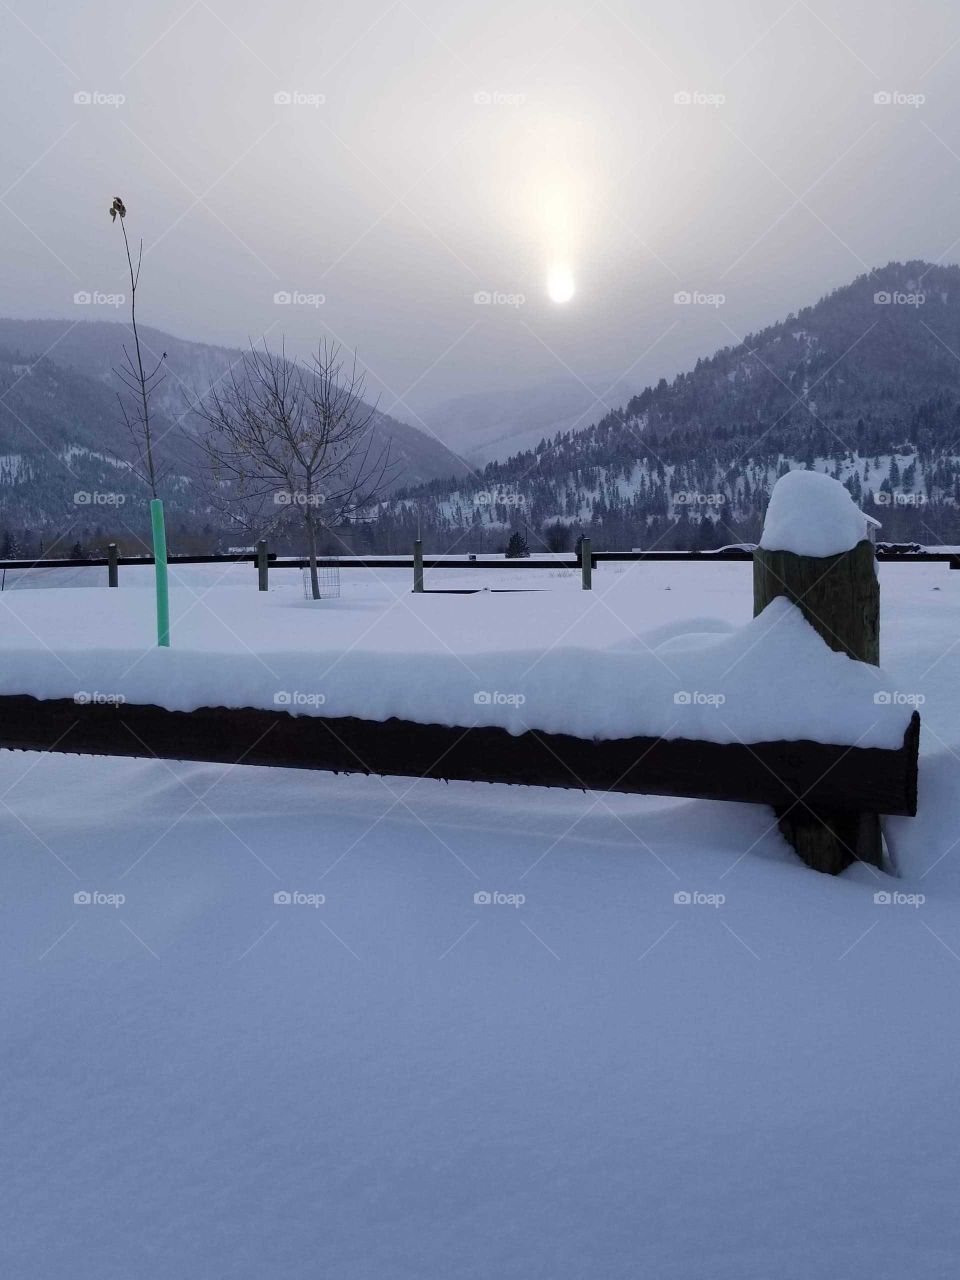 sunset, winter sunset, snow, post blizzard, deep snow, fence with snow, dreamy, winter scenery